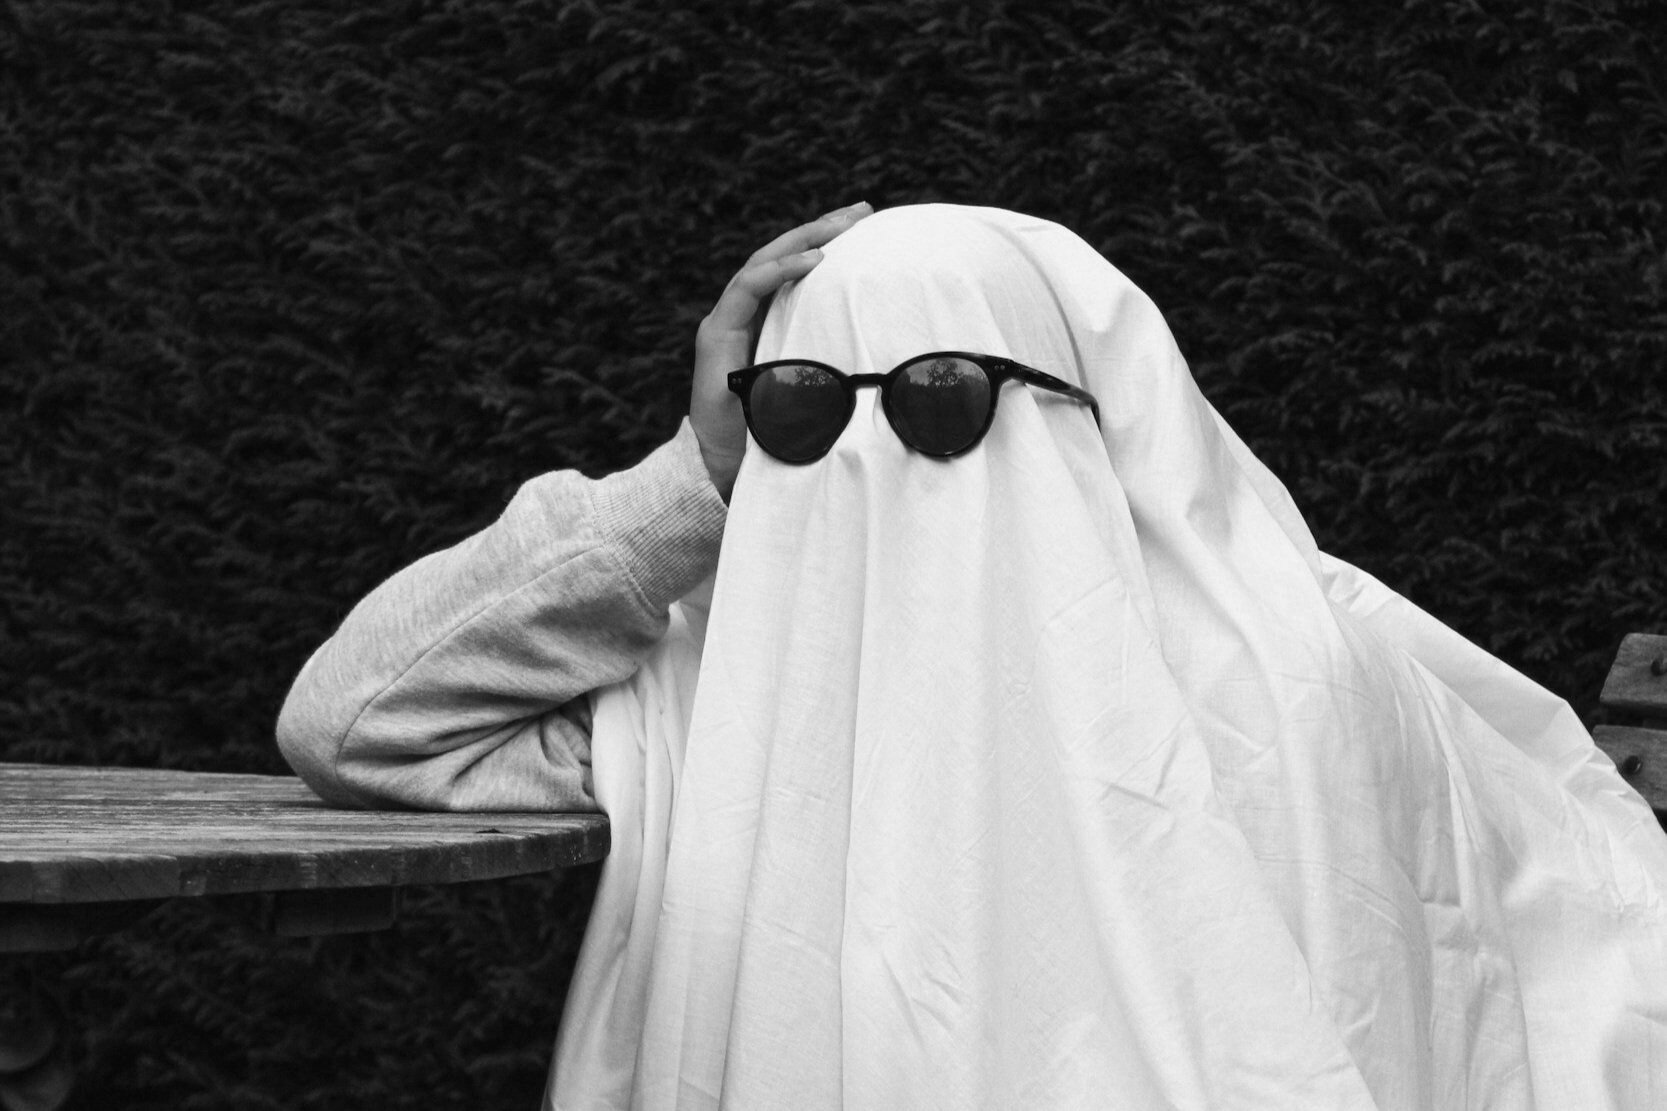 Commercial ghosting: a reflection on the state we've reached